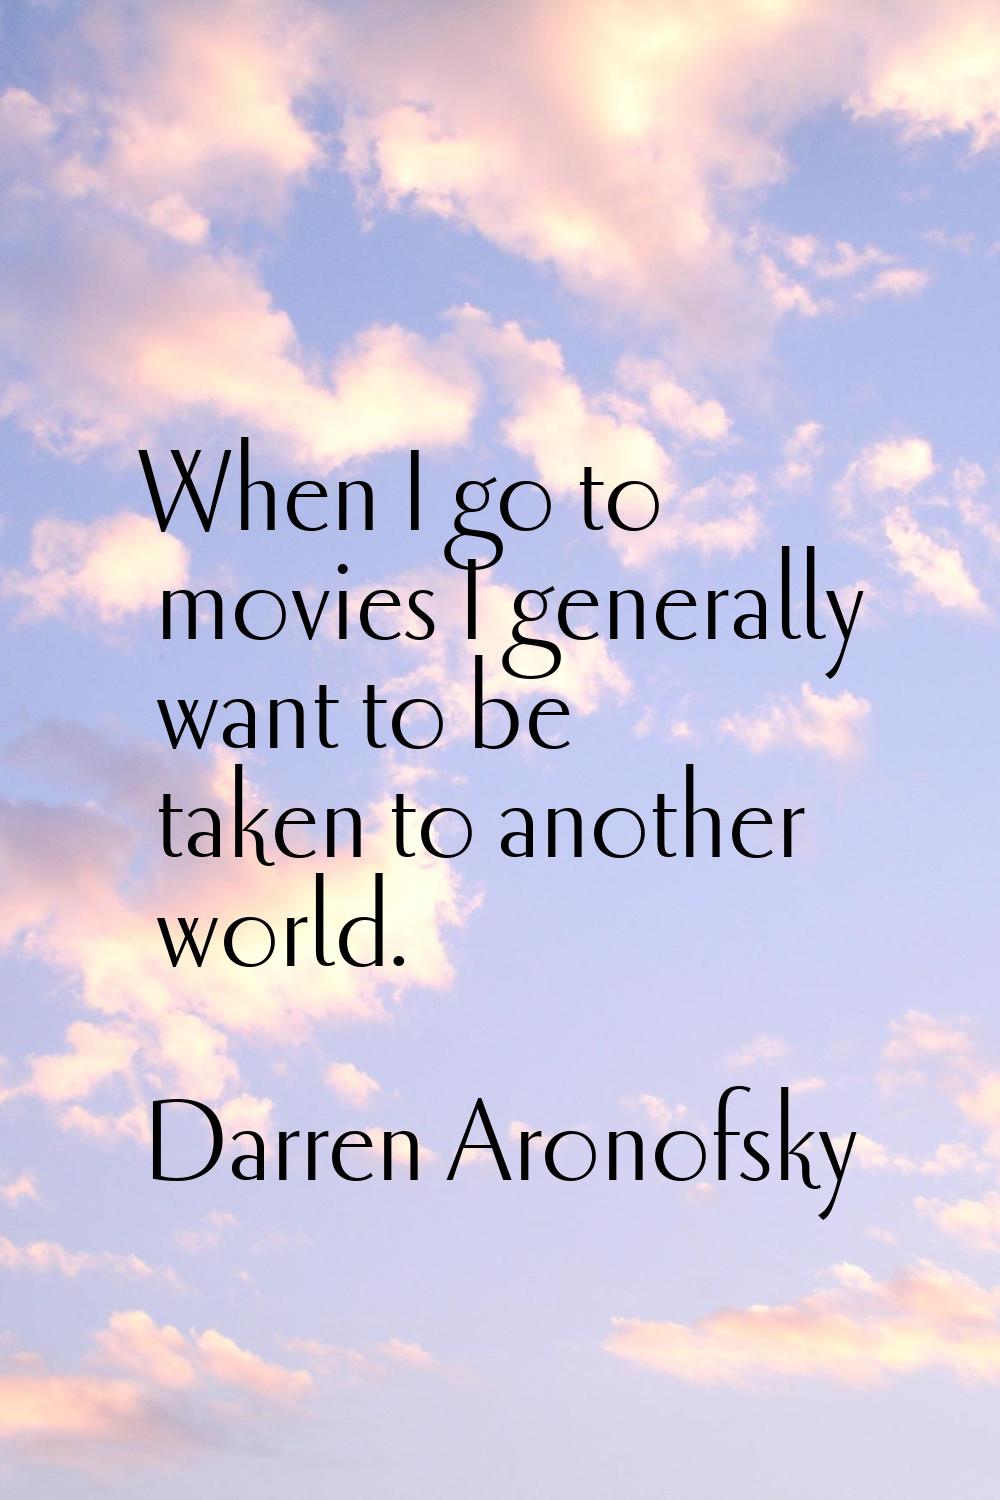 When I go to movies I generally want to be taken to another world.